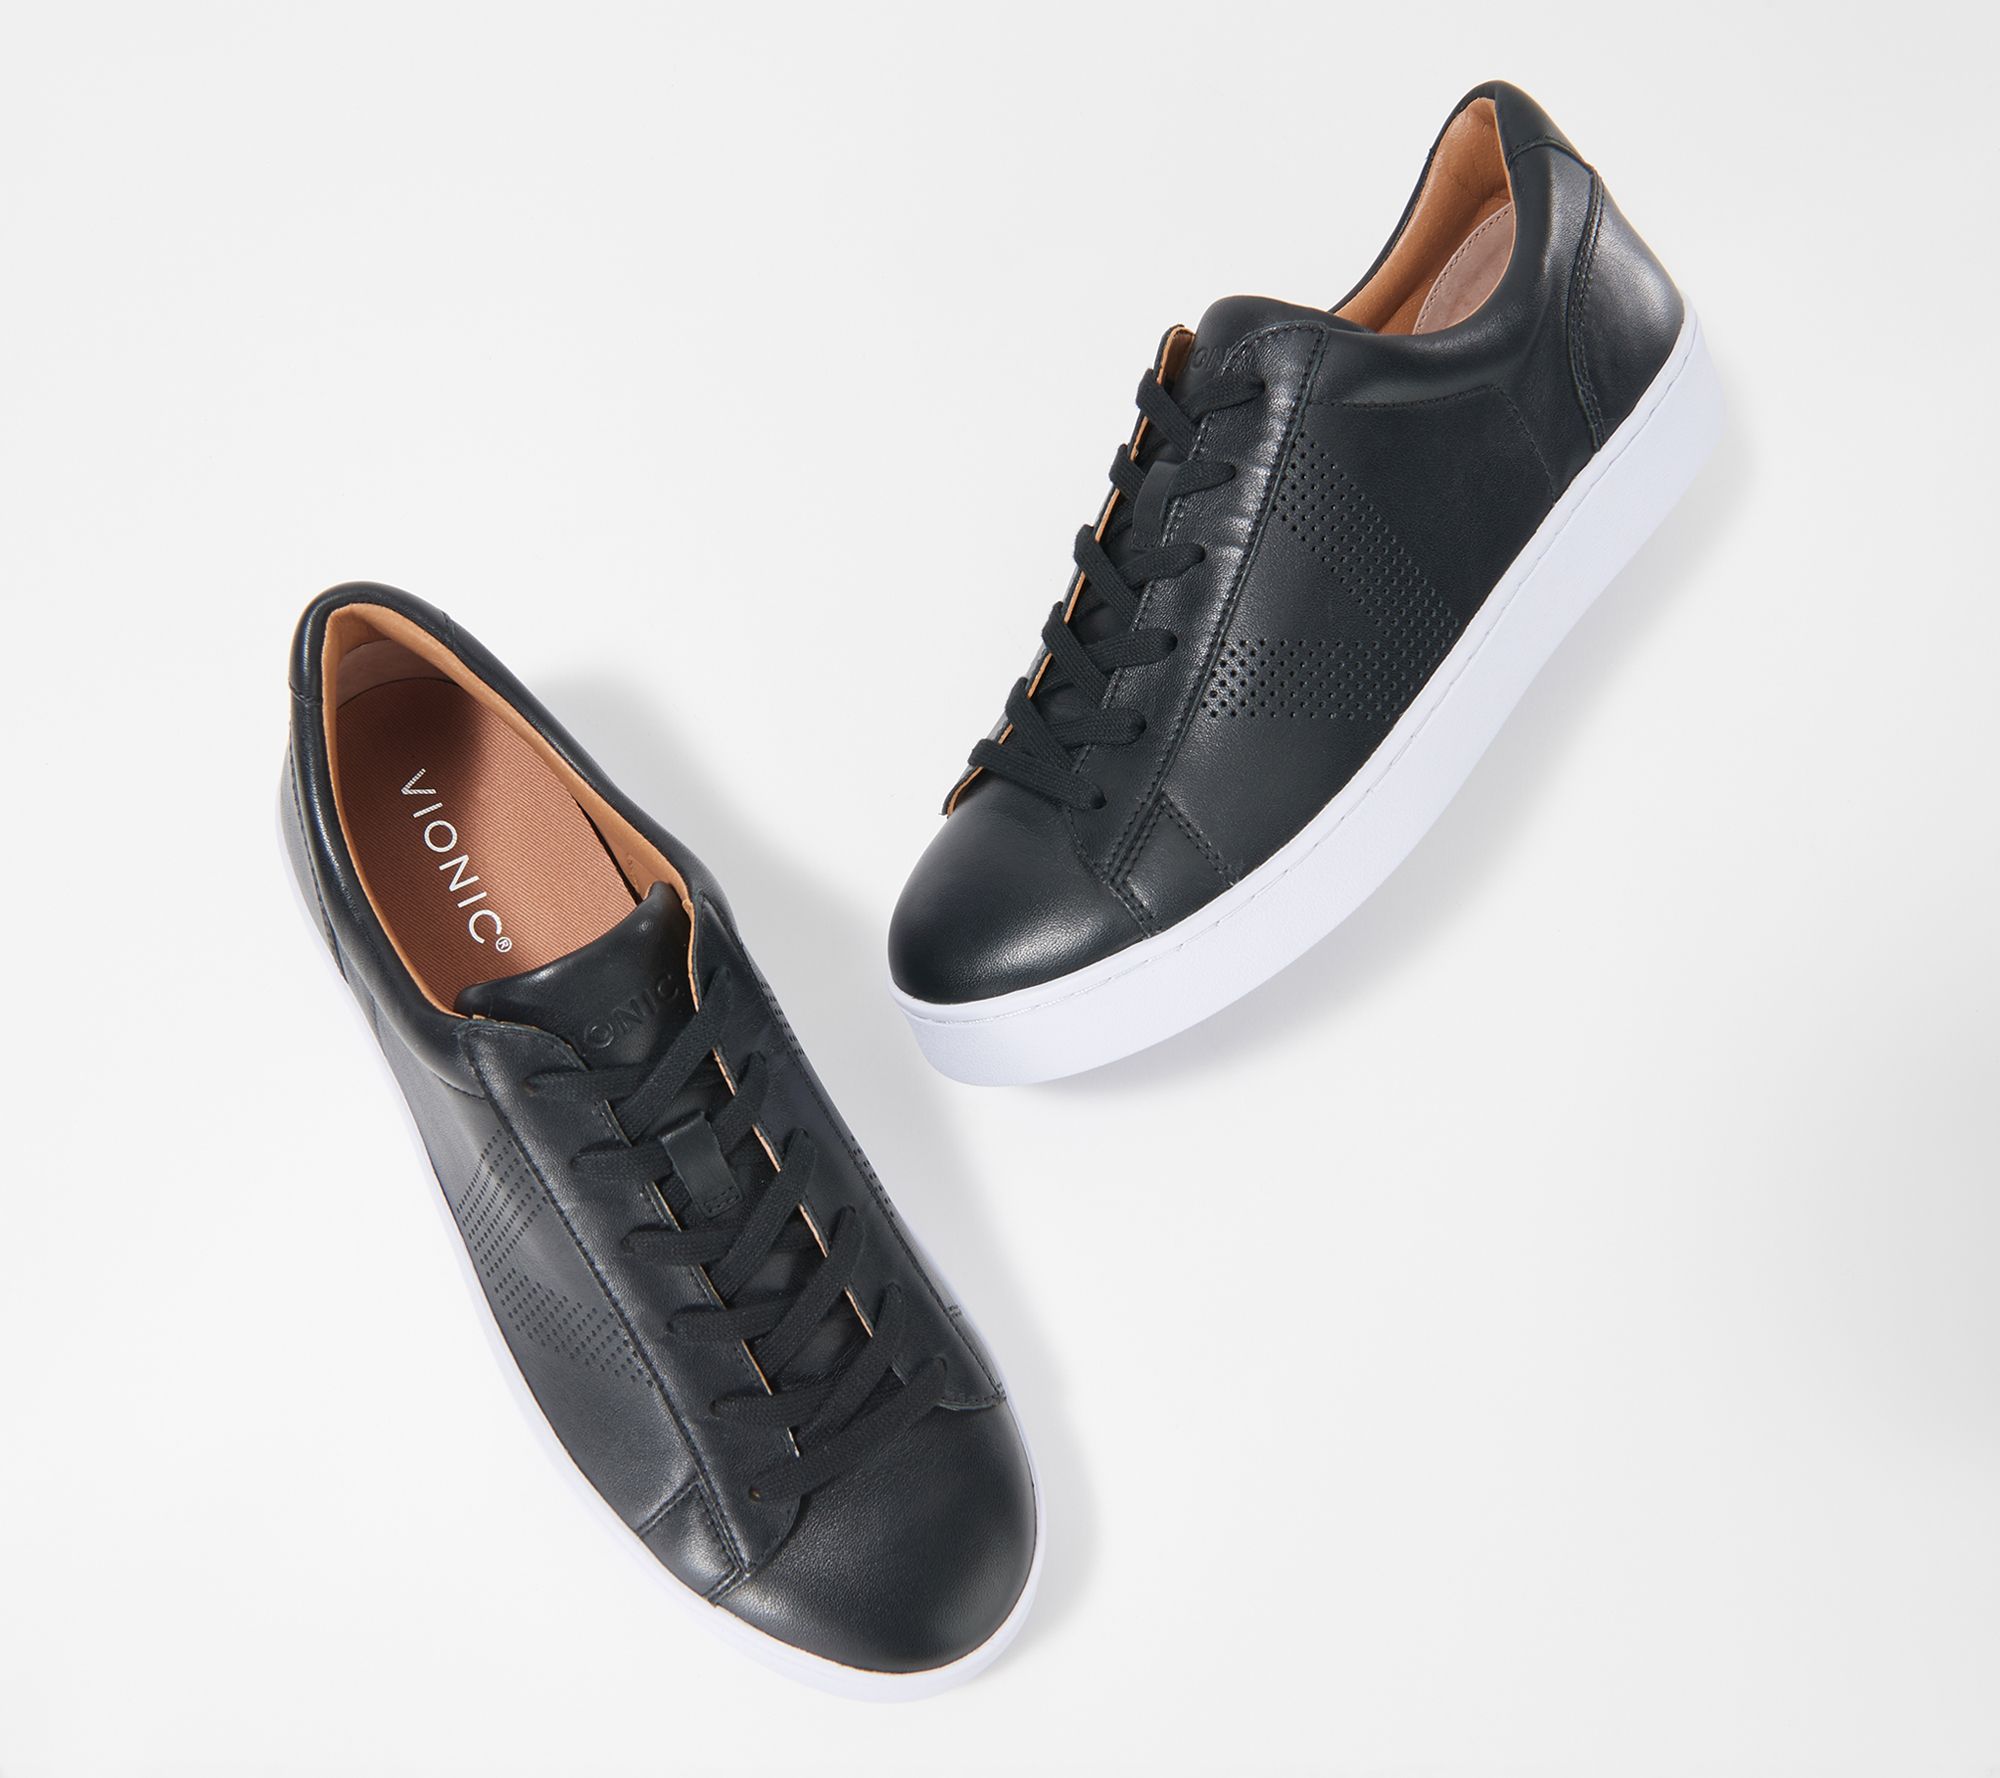 Vionic Leather Lace-Up Sneakers - Honey 